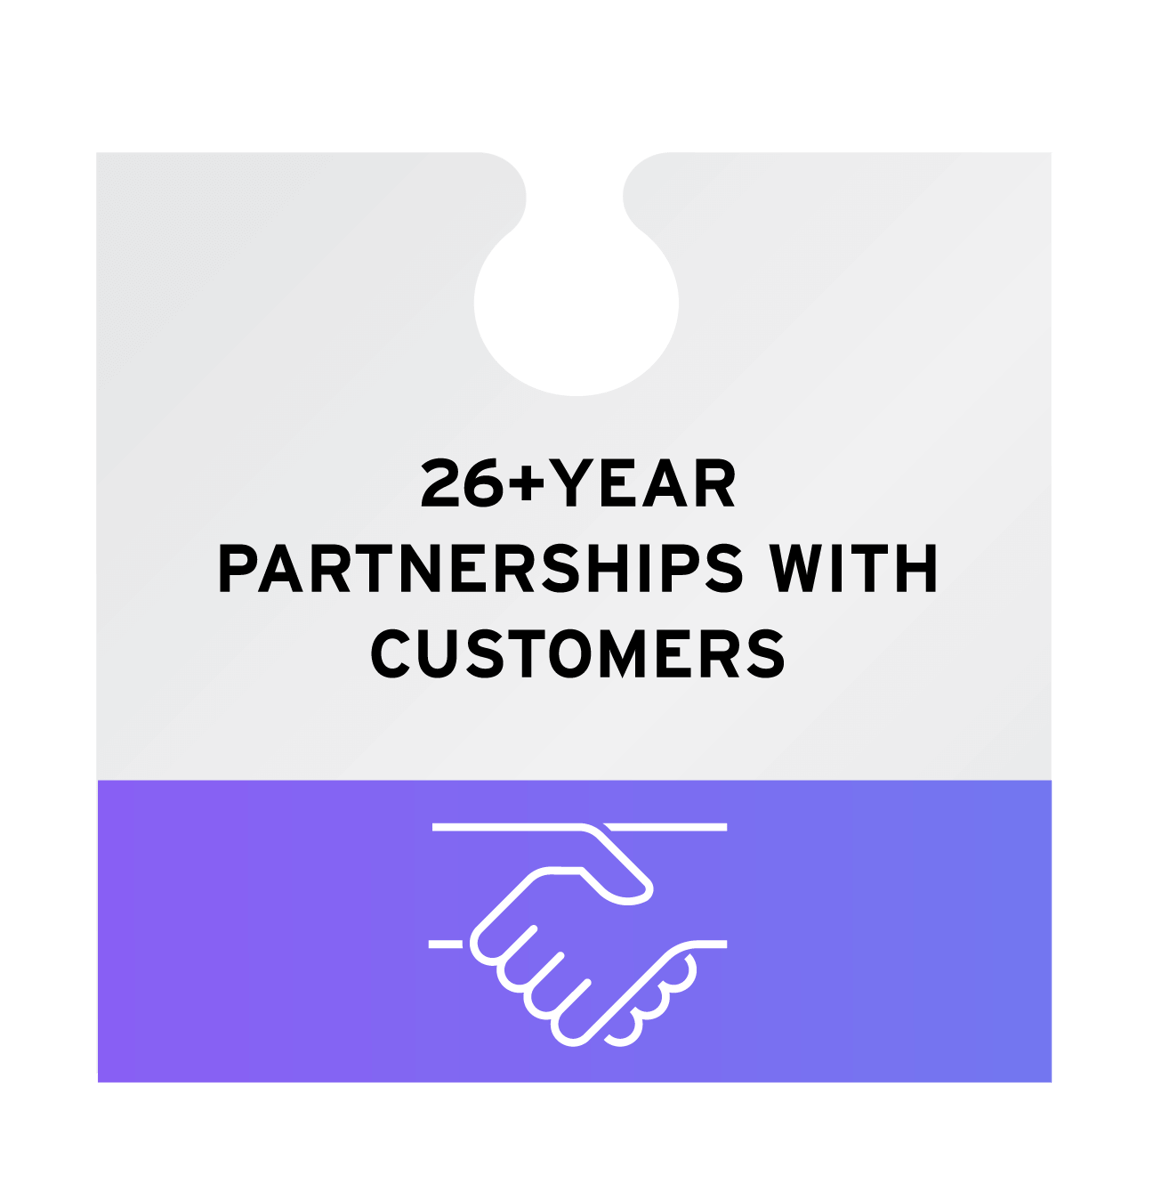 26+ Year Partnerships with Customers